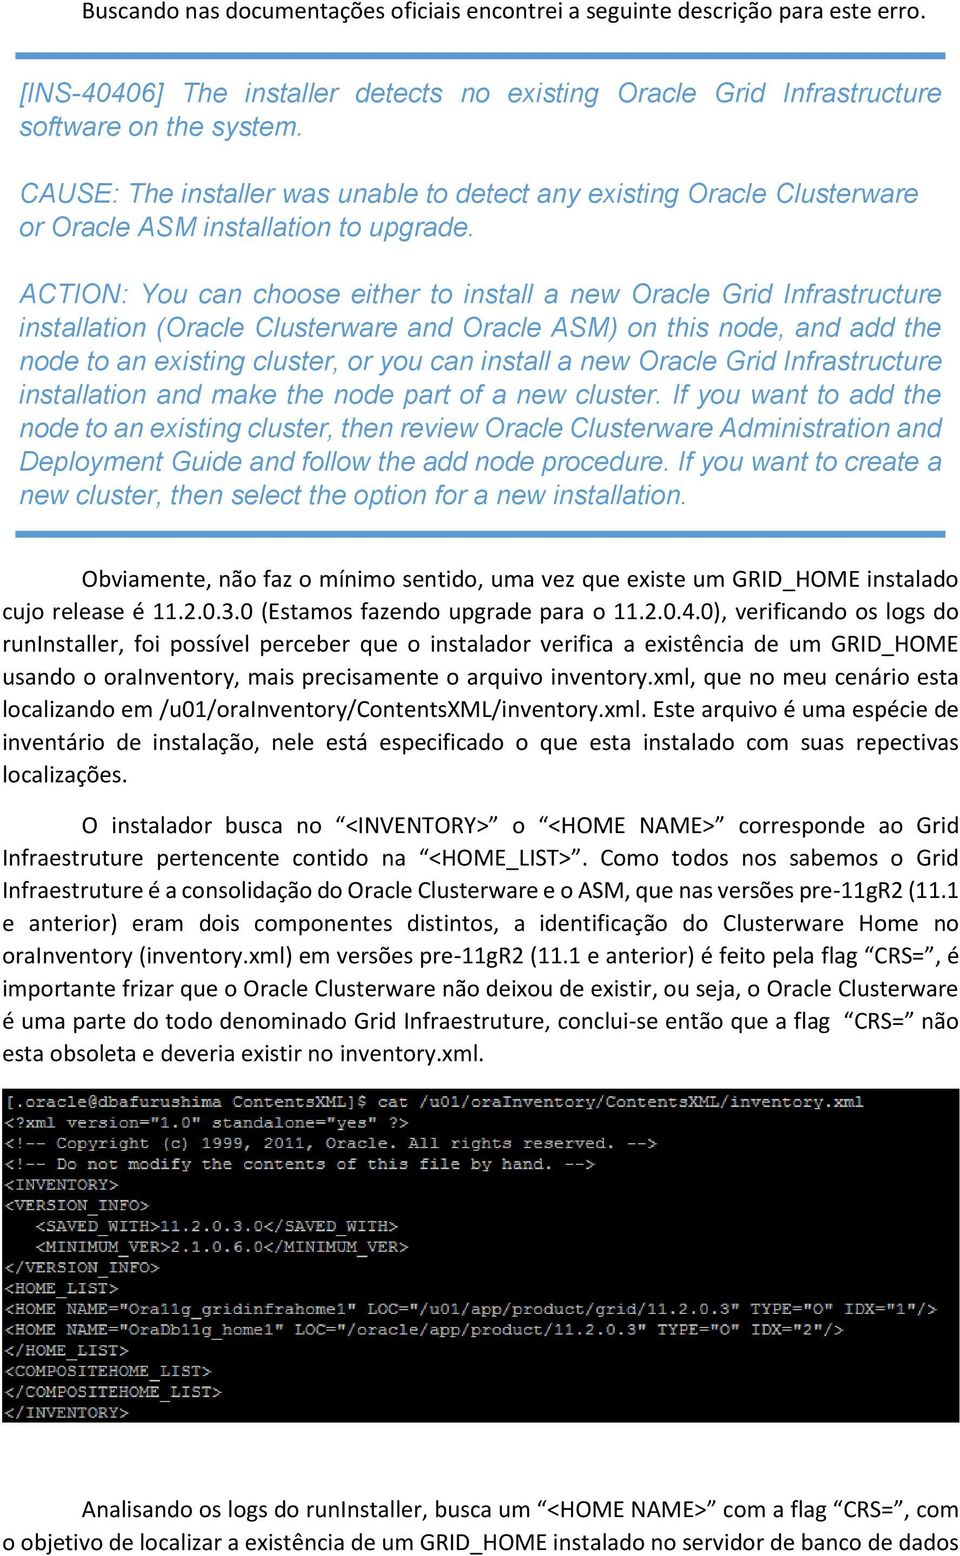 ACTION: You can choose either to install a new Oracle Grid Infrastructure installation (Oracle Clusterware and Oracle ASM) on this node, and add the node to an existing cluster, or you can install a